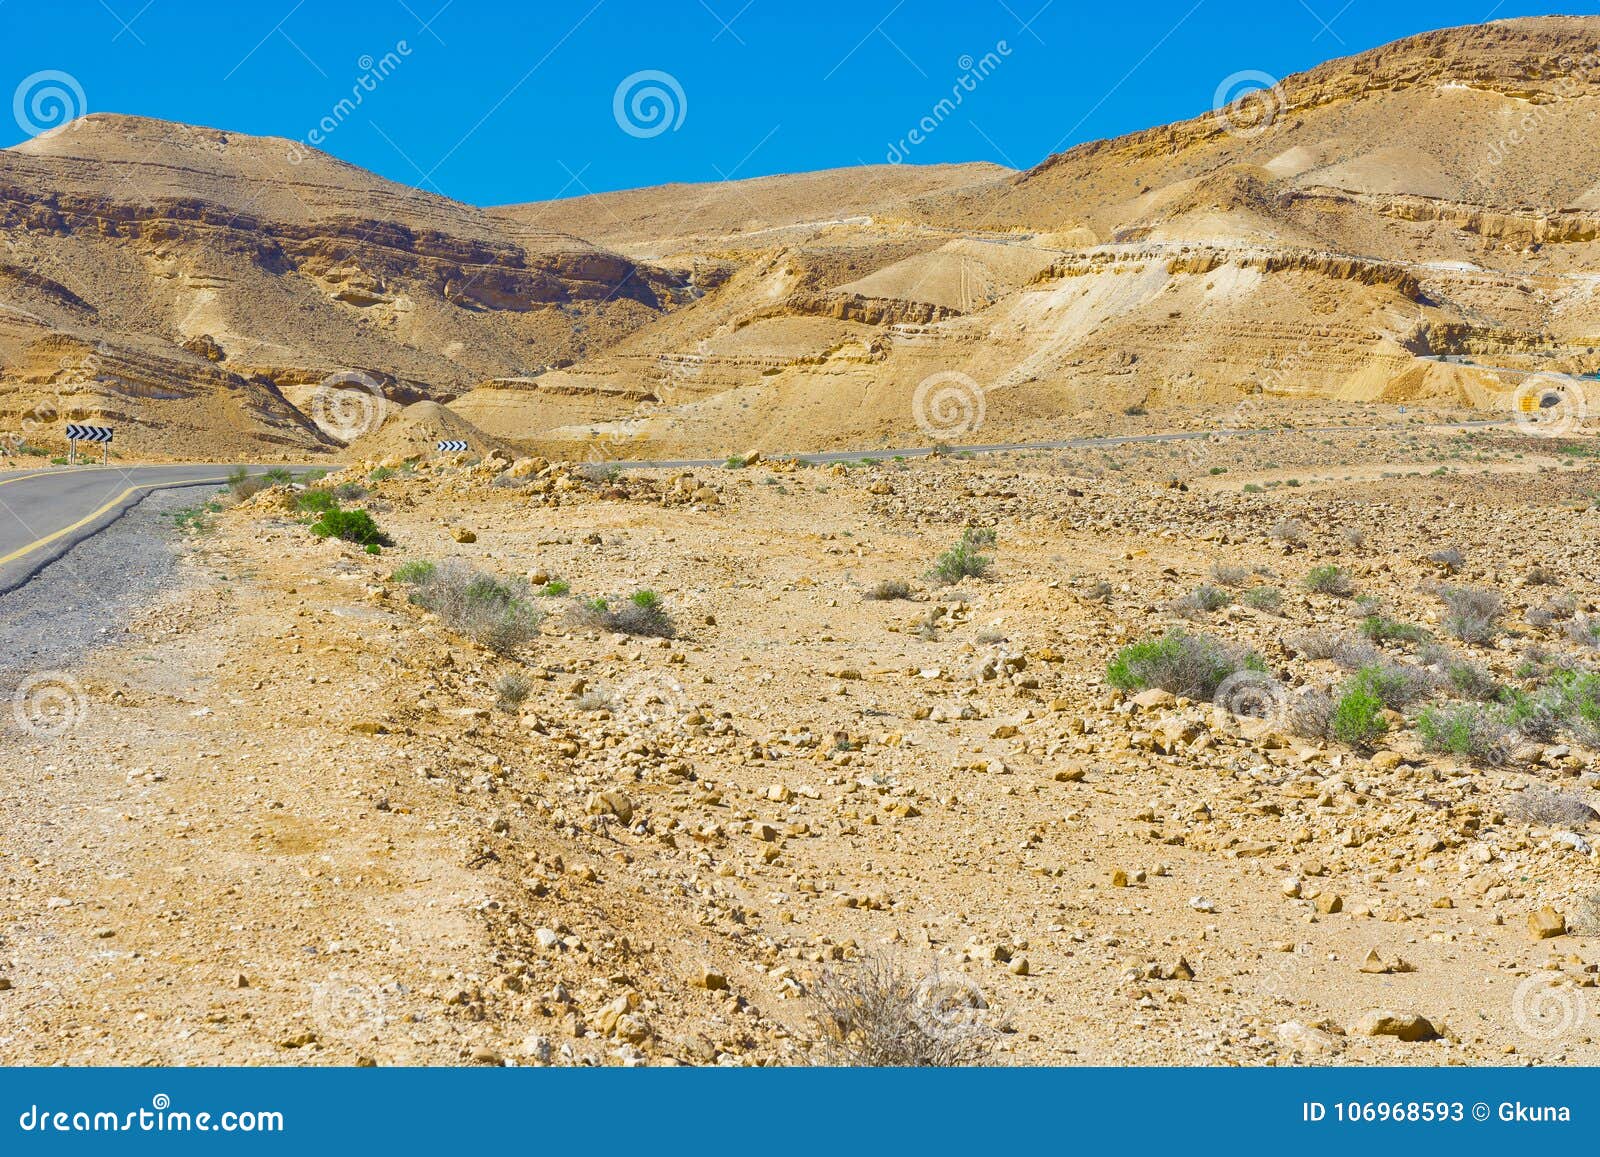 Wadis and Craters in Desert Stock Image - Image of countryside, hiking